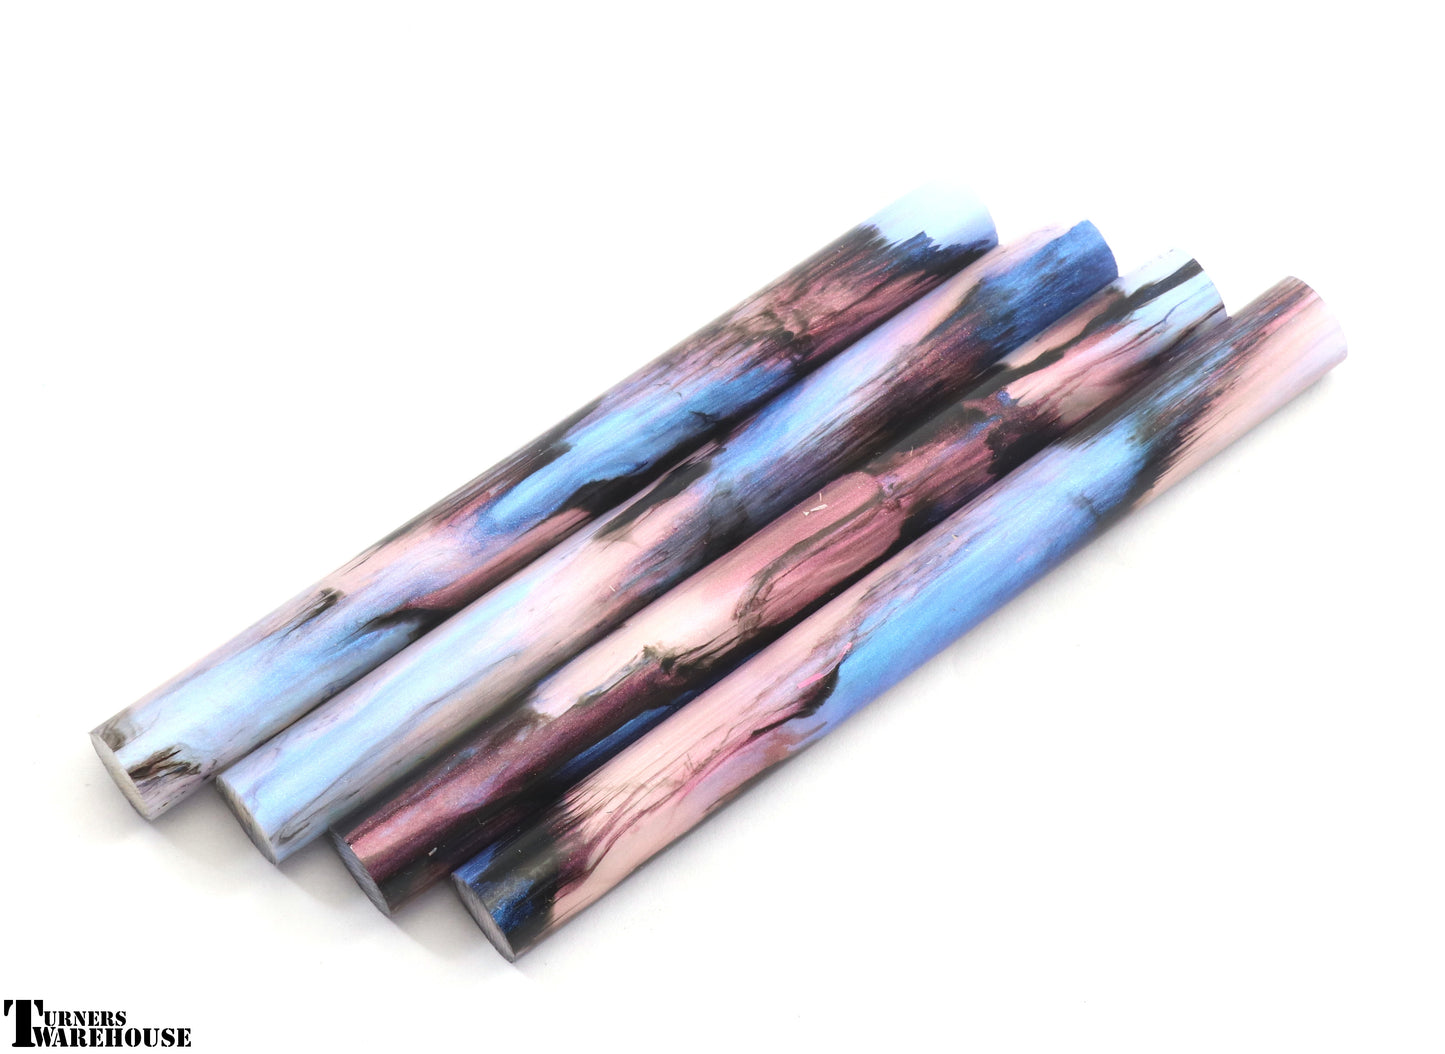 Top Choice Pen Blanks Abalone